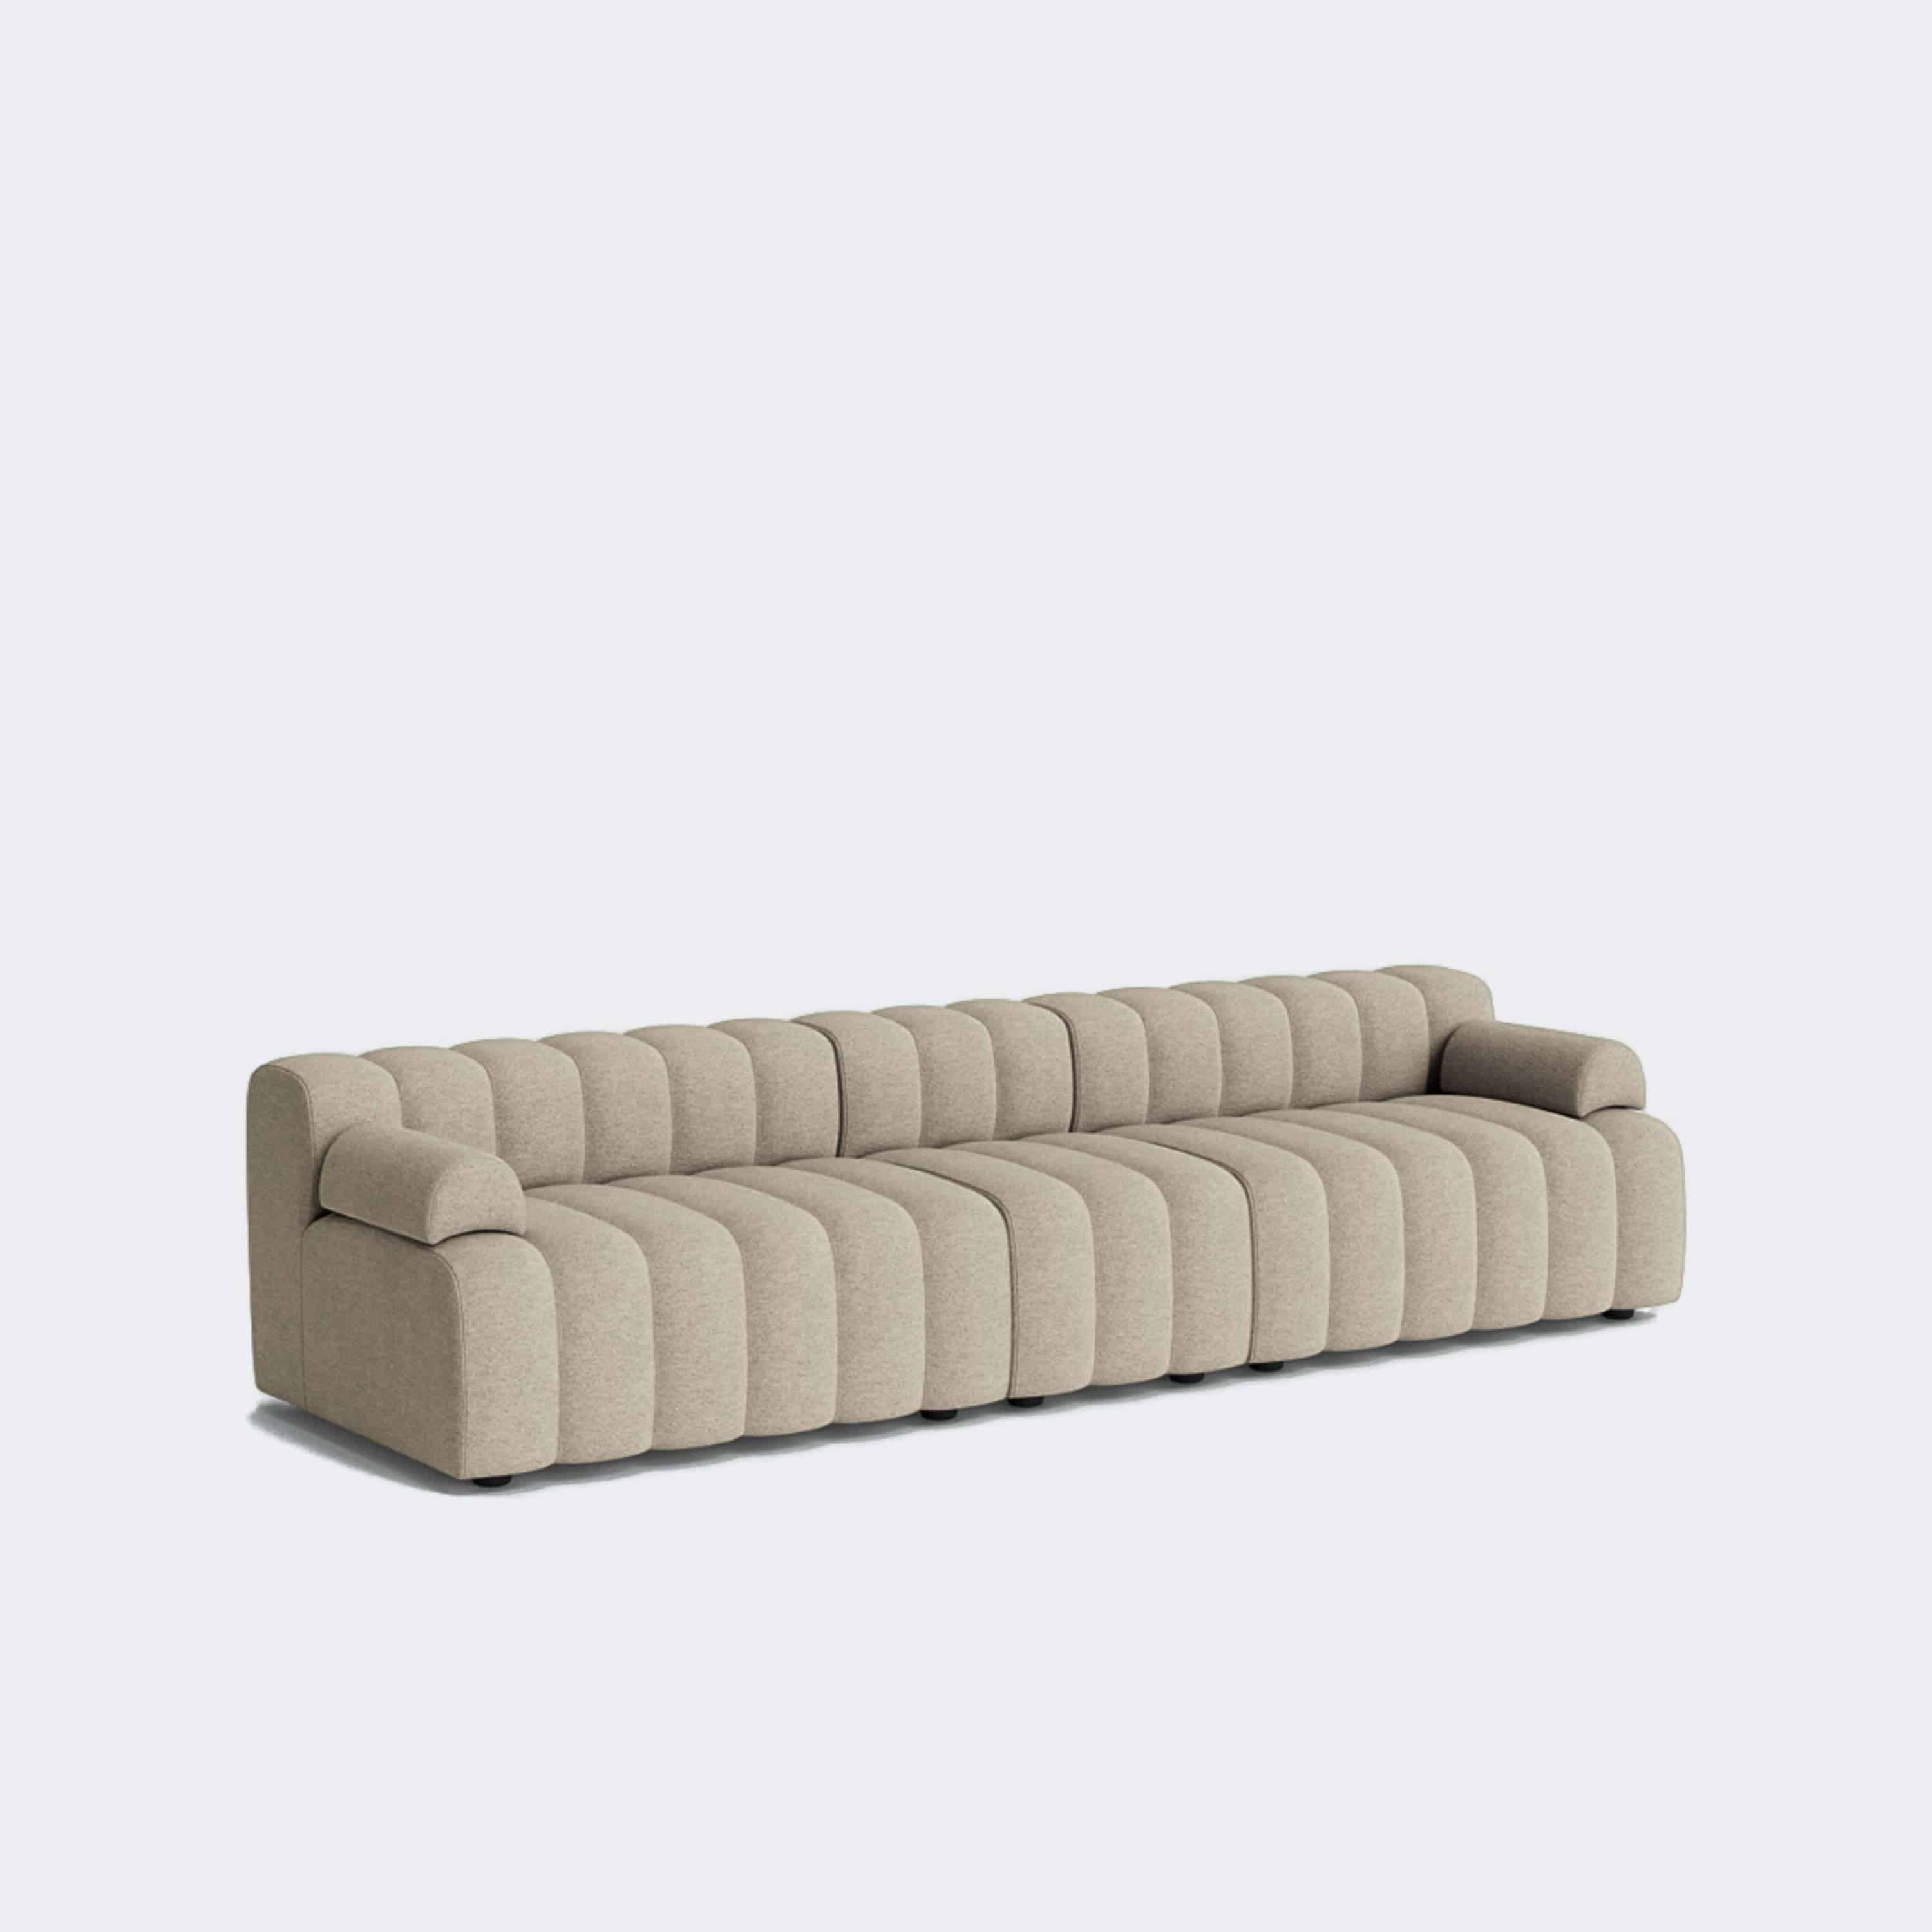 Norr11 Studio 3 Made To Order Barnum Col 3 - KANSO#Upholstery_Barnum Col 3